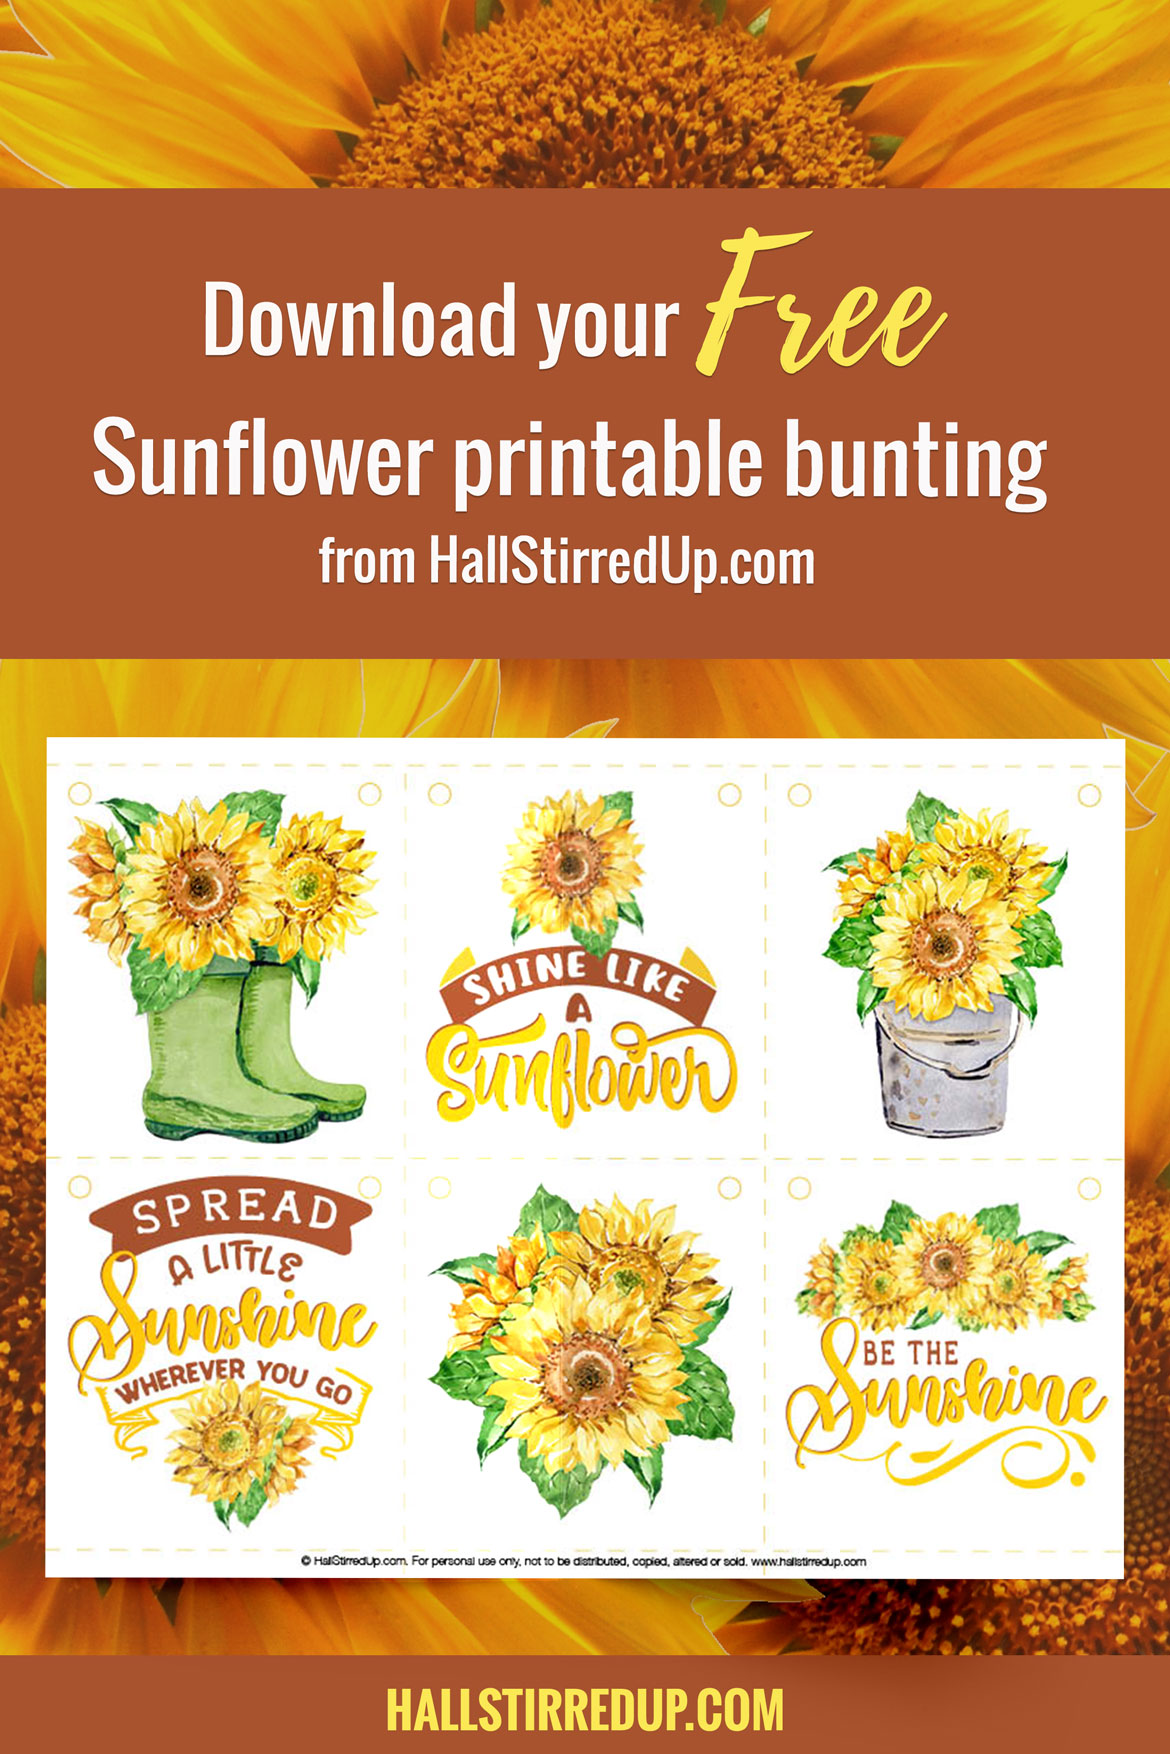 Spread sunshine with a free Sunflower printable bunting